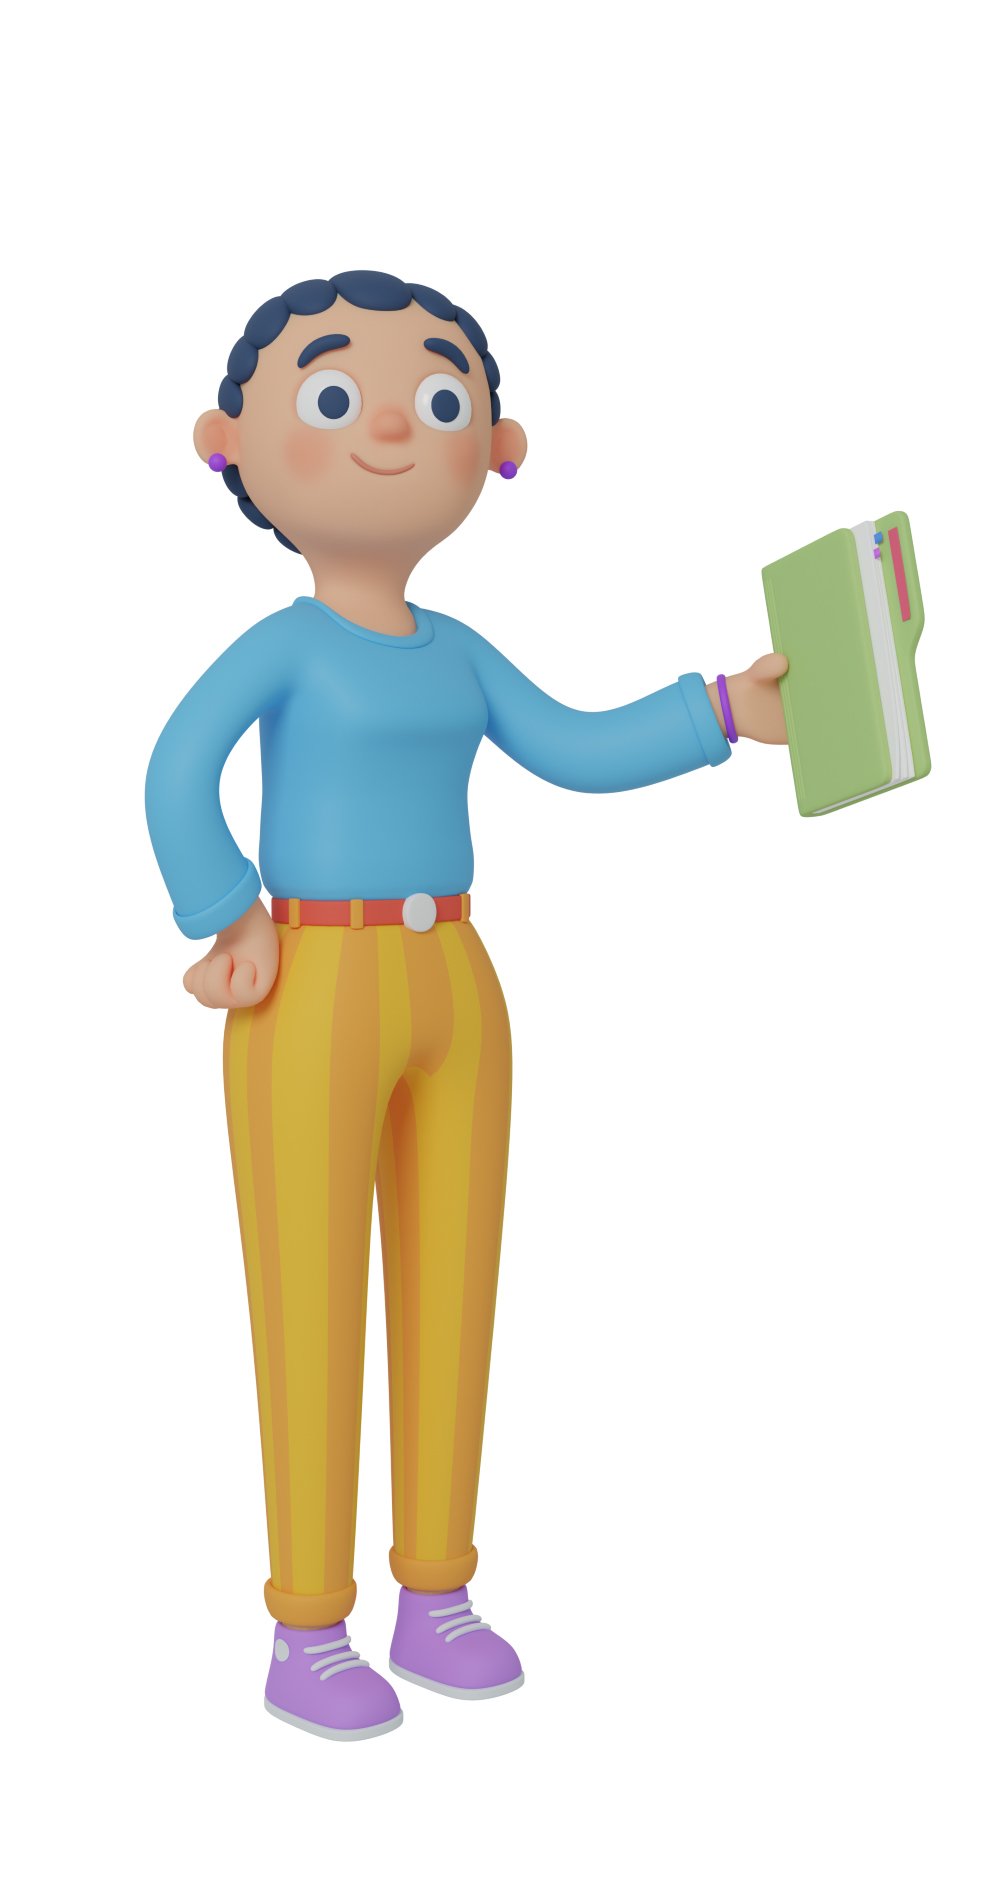 3d character design of a woman with short hair